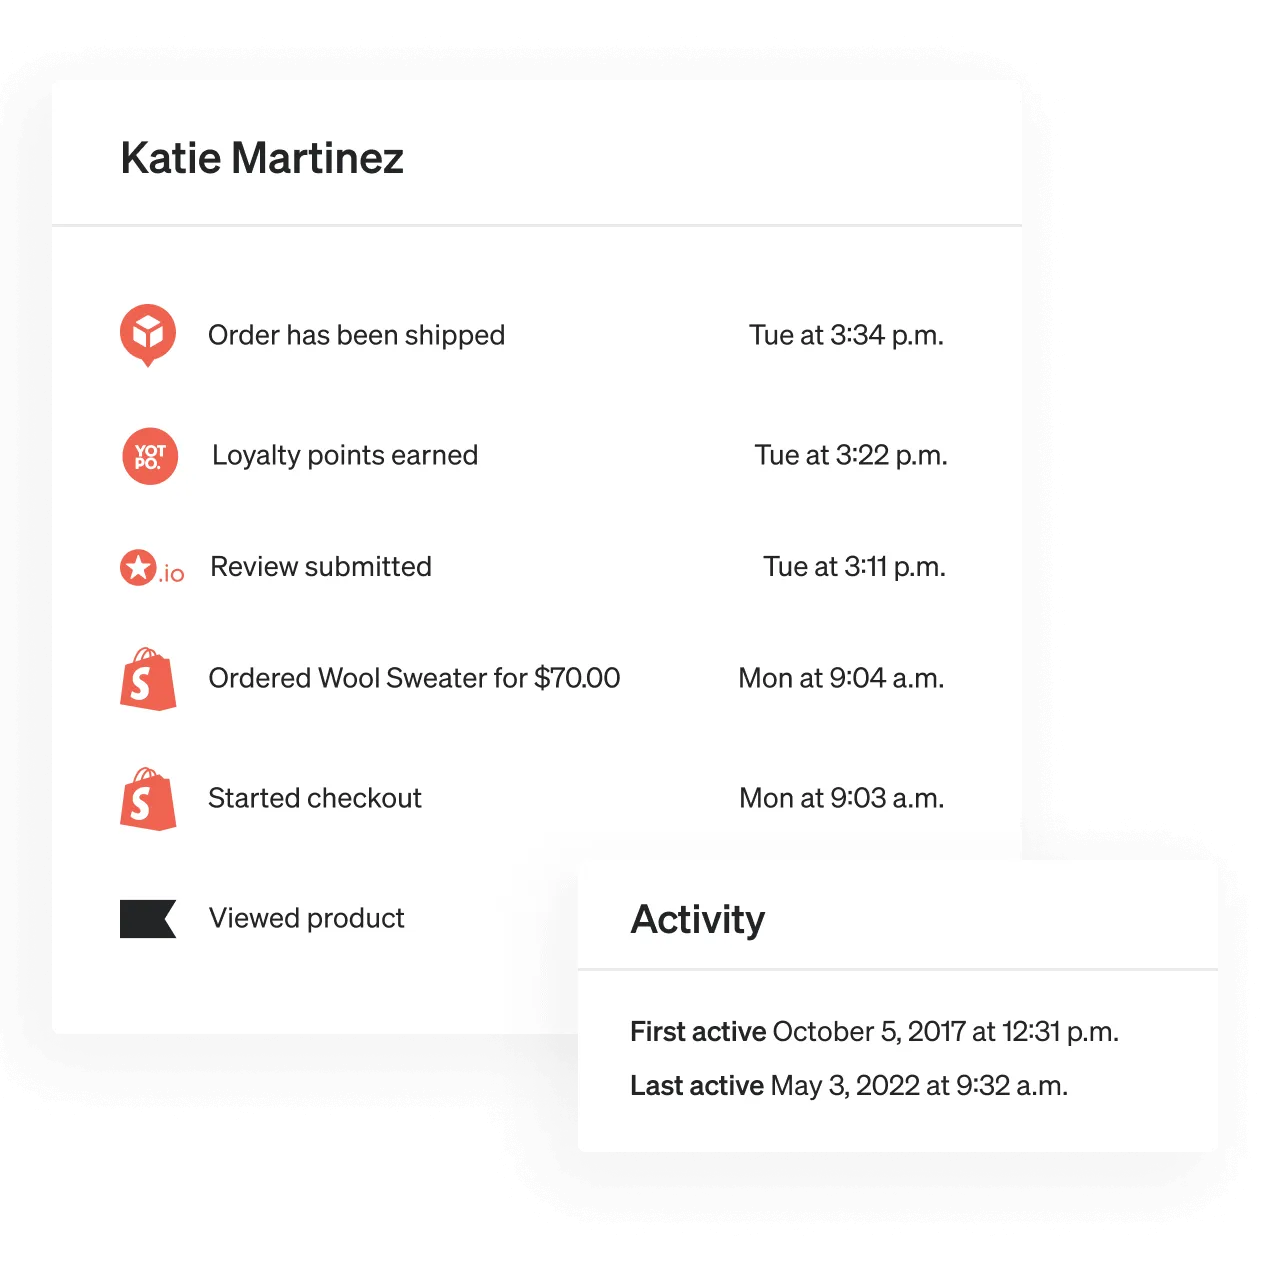 Klaviyo used for automating your marketing